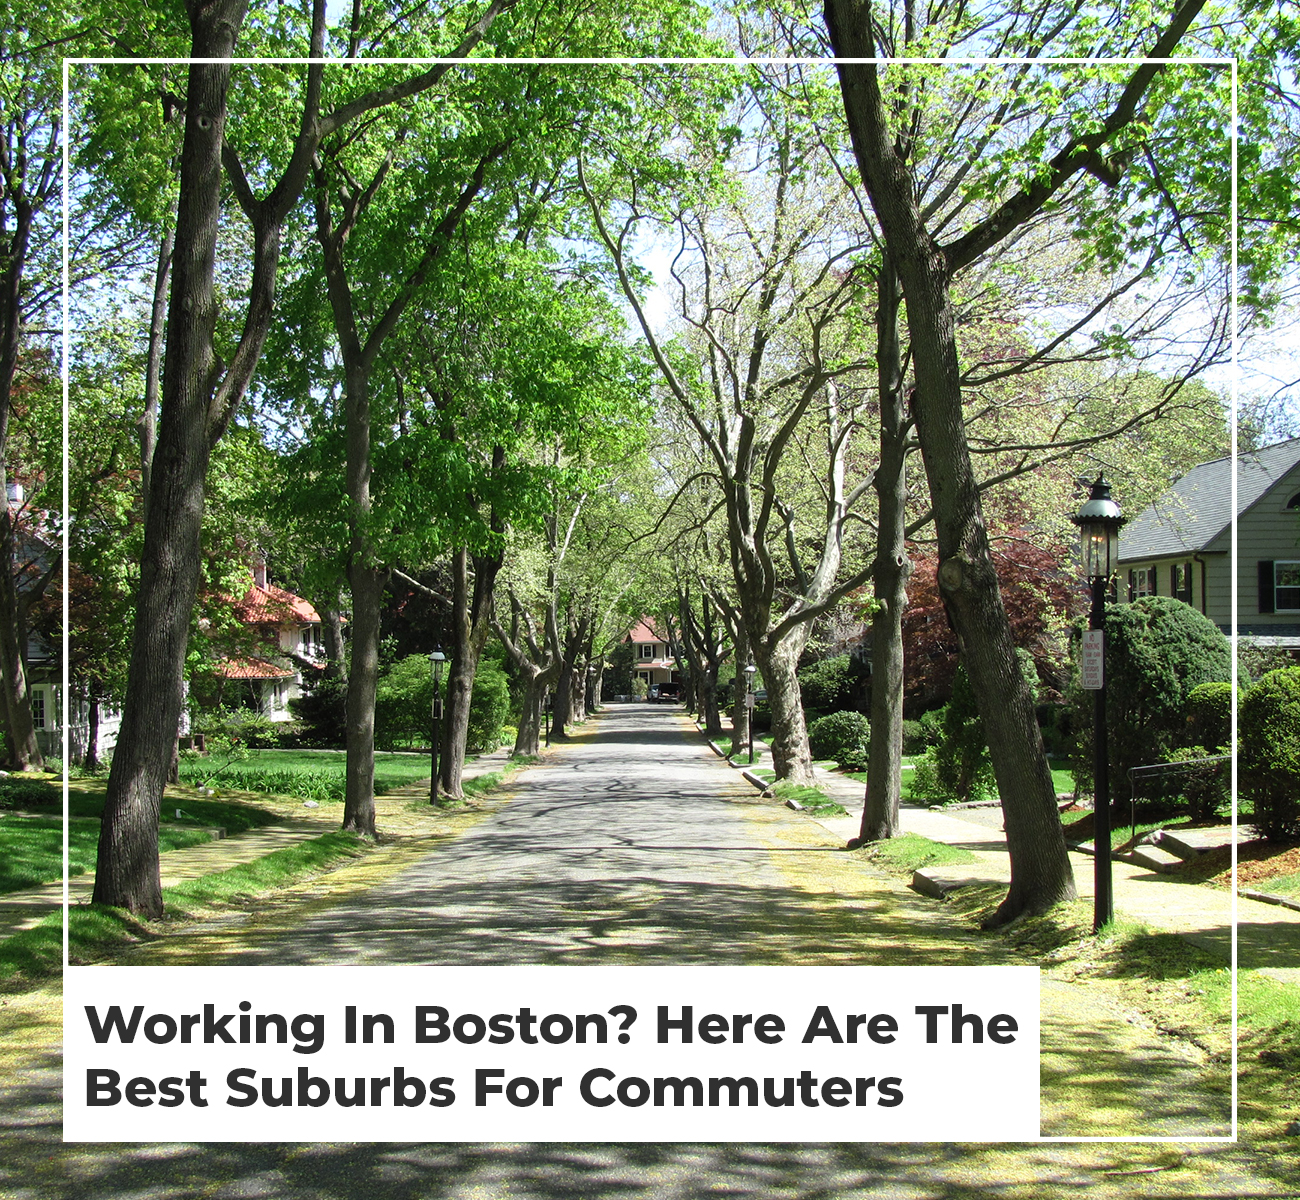 Working In Boston? Here Are The Best Suburbs For Commuters